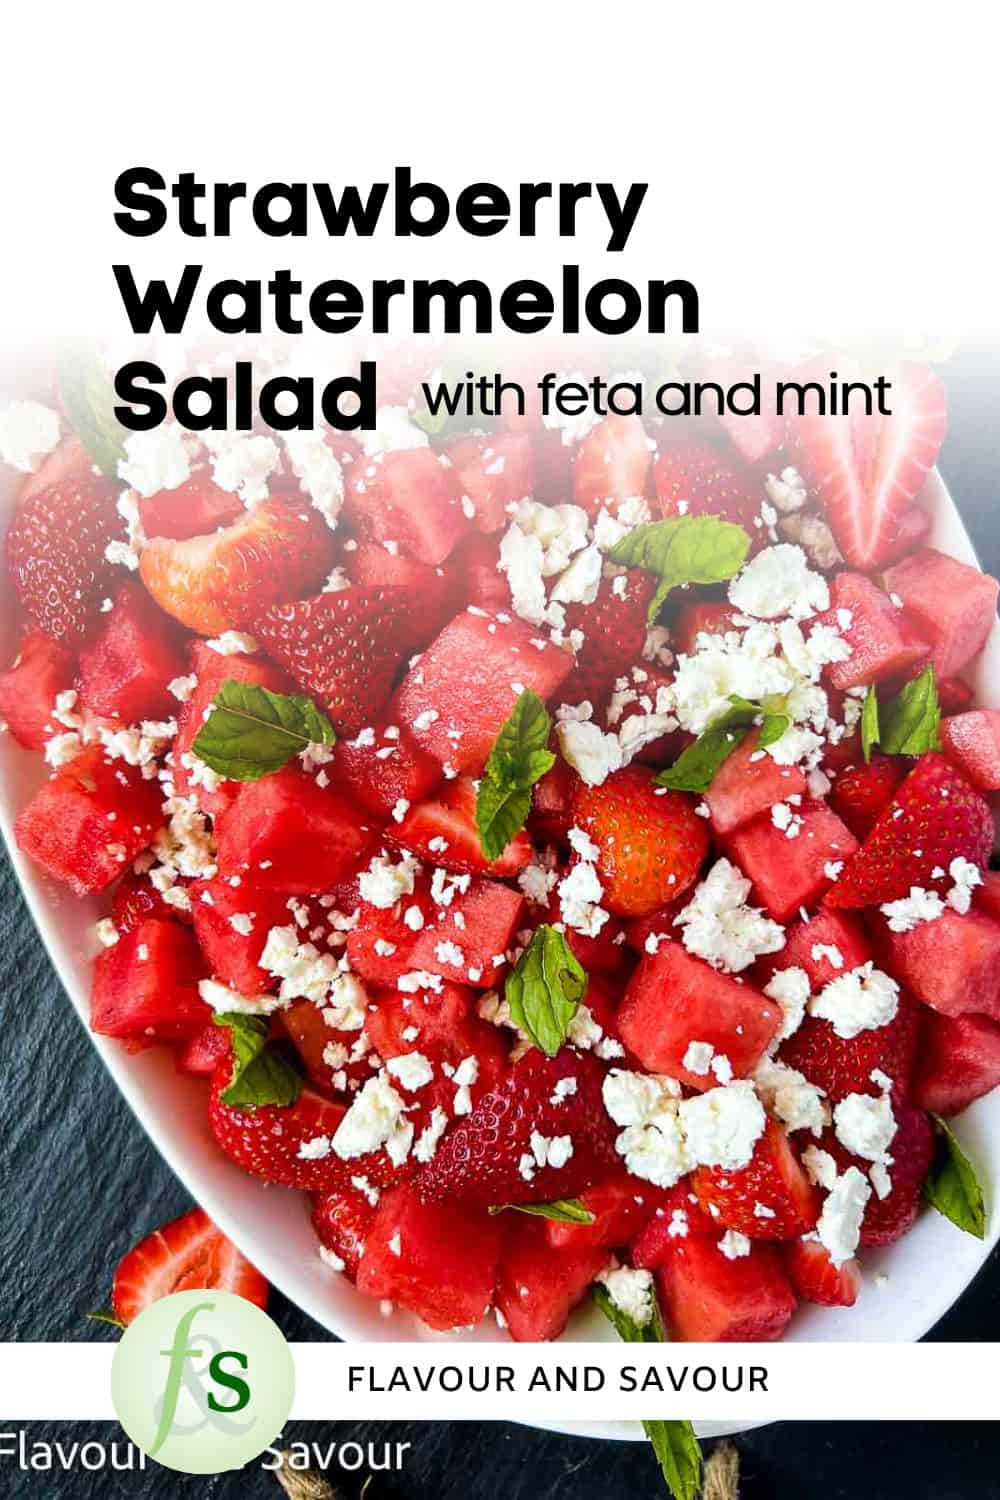 Image with text for strawberry watermelon salad with feta and mint.